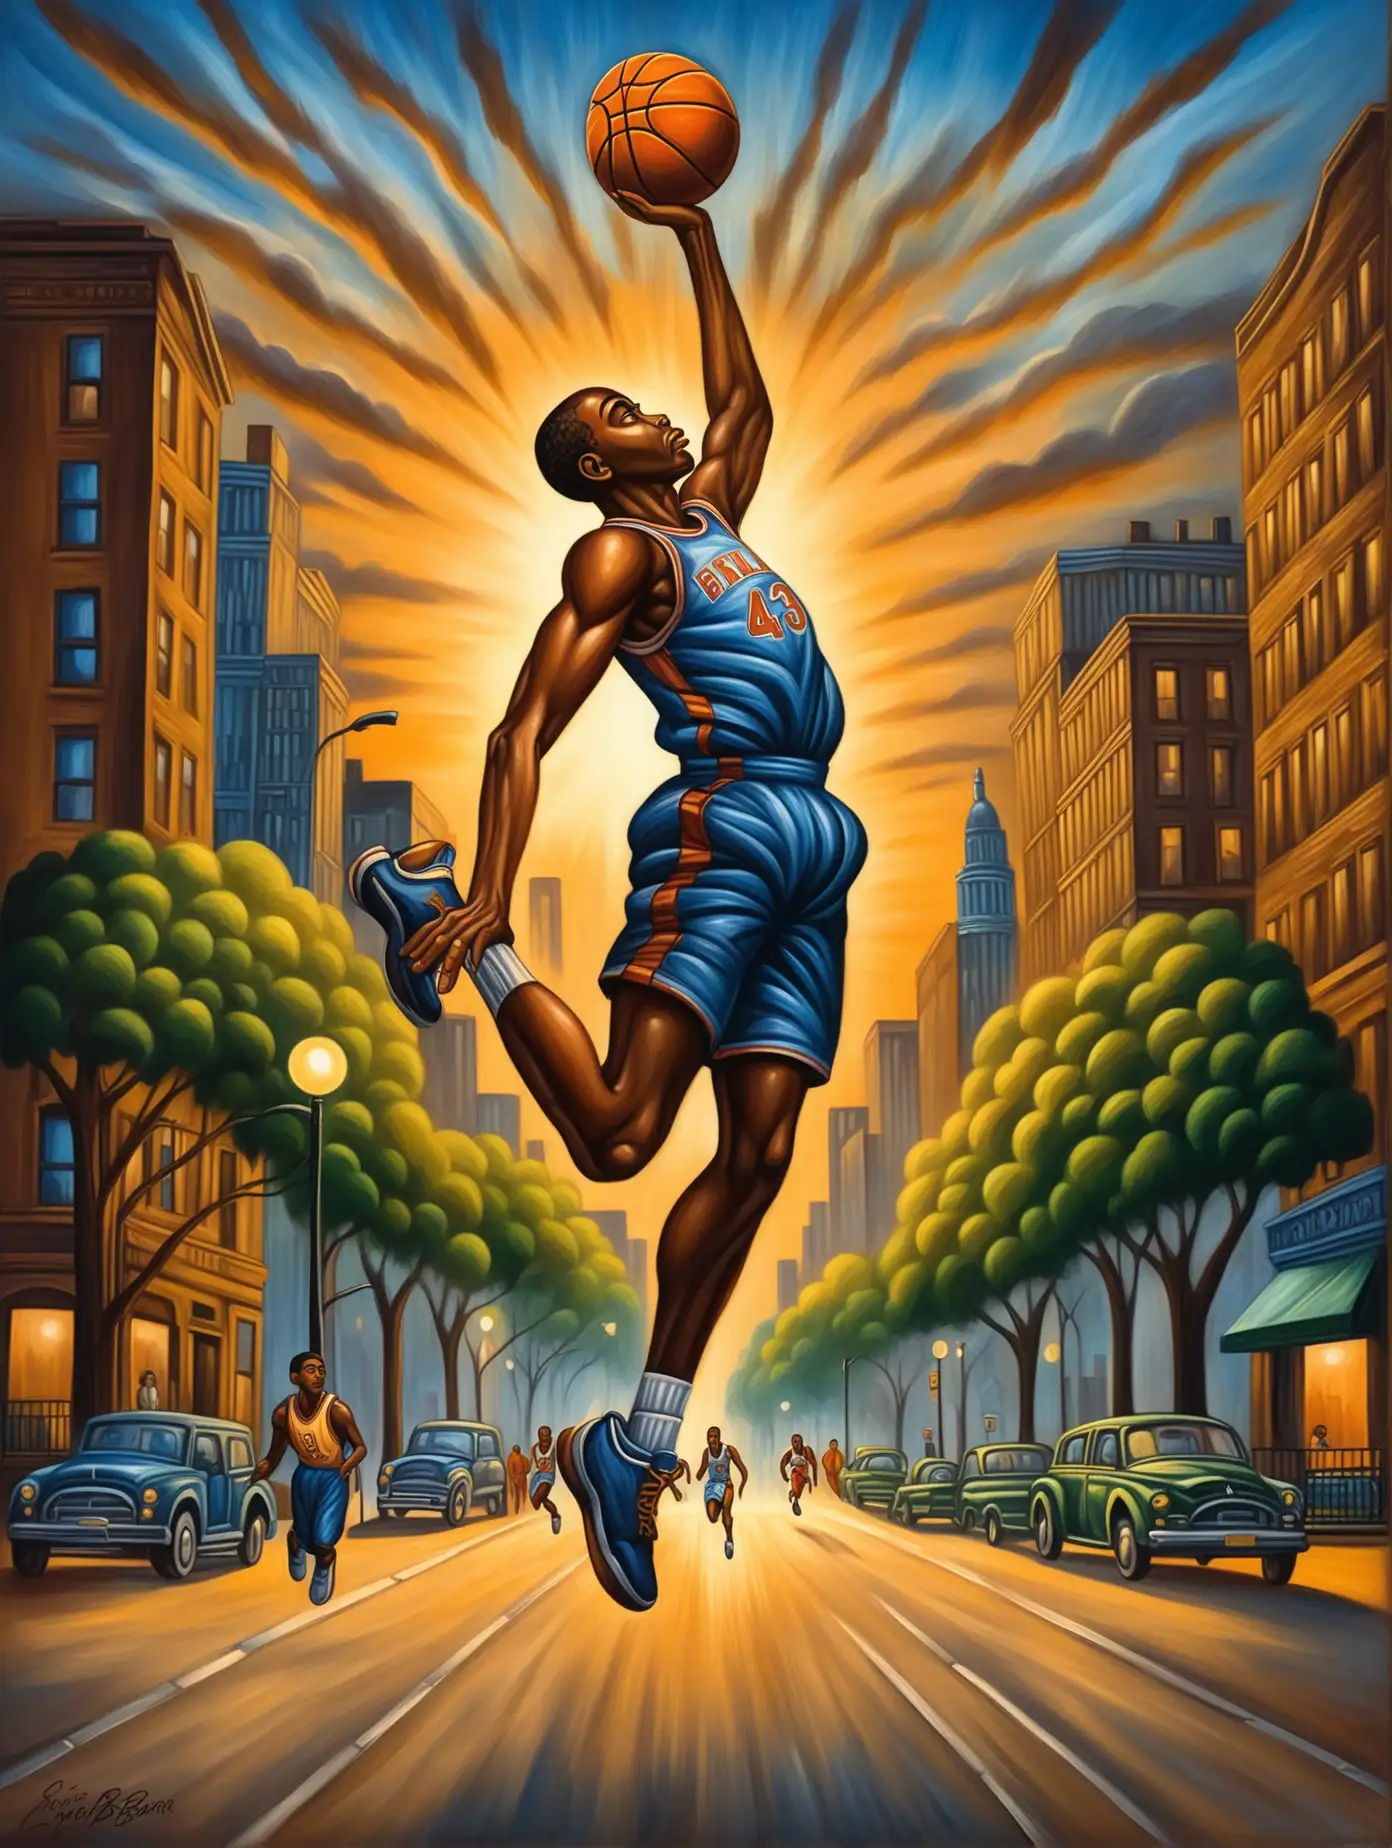 Creating oil paintings in the style artist I’m Ernie Barnes and a basketball player African-American playing ball in the city in the park by myself jumping through the air. Oh no beautiful evening.